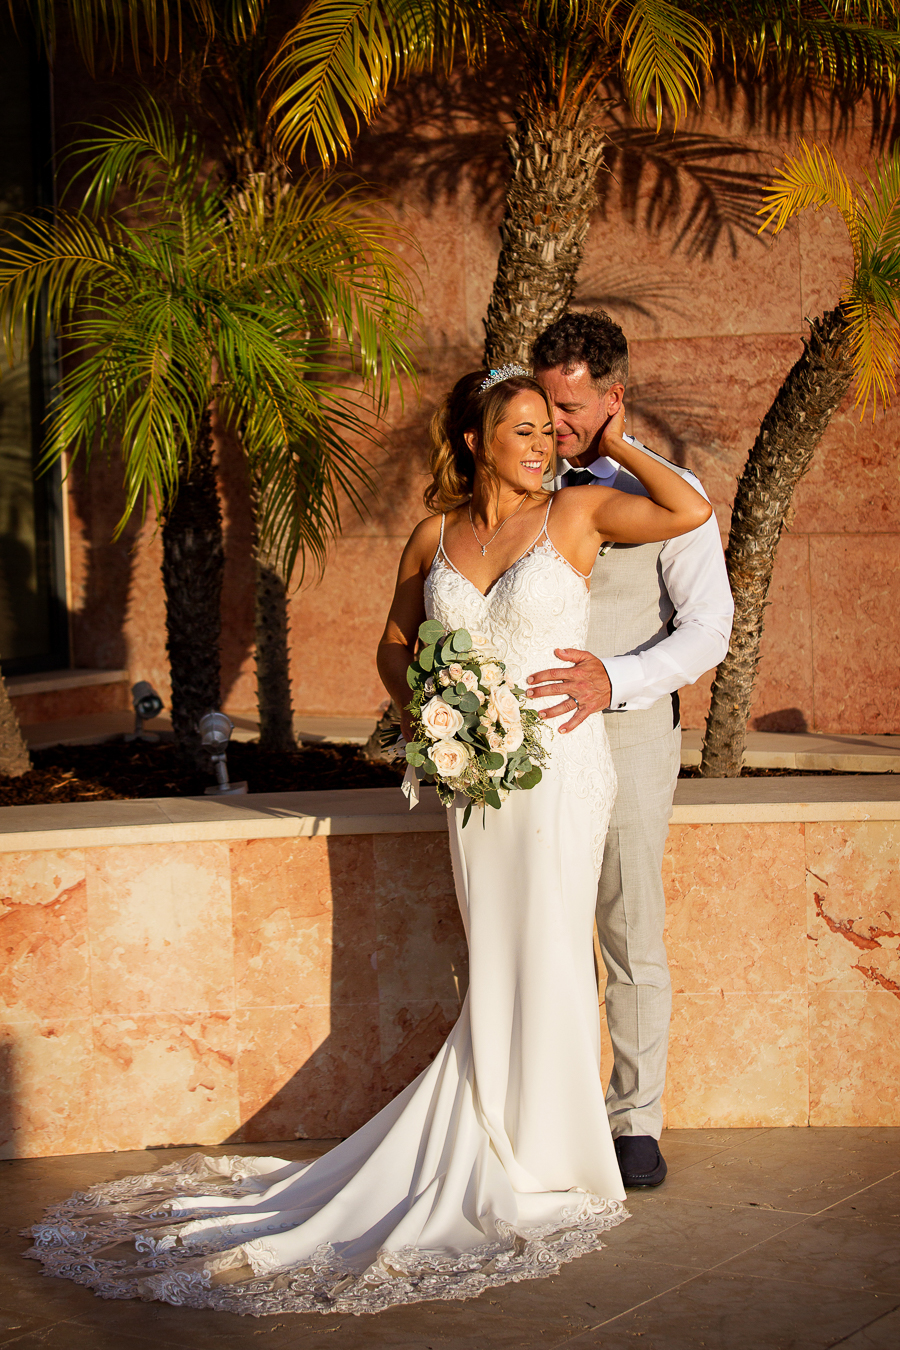 Stacy & Darren’s romantic destination wedding in Portugal, with Martin Dabek Photography